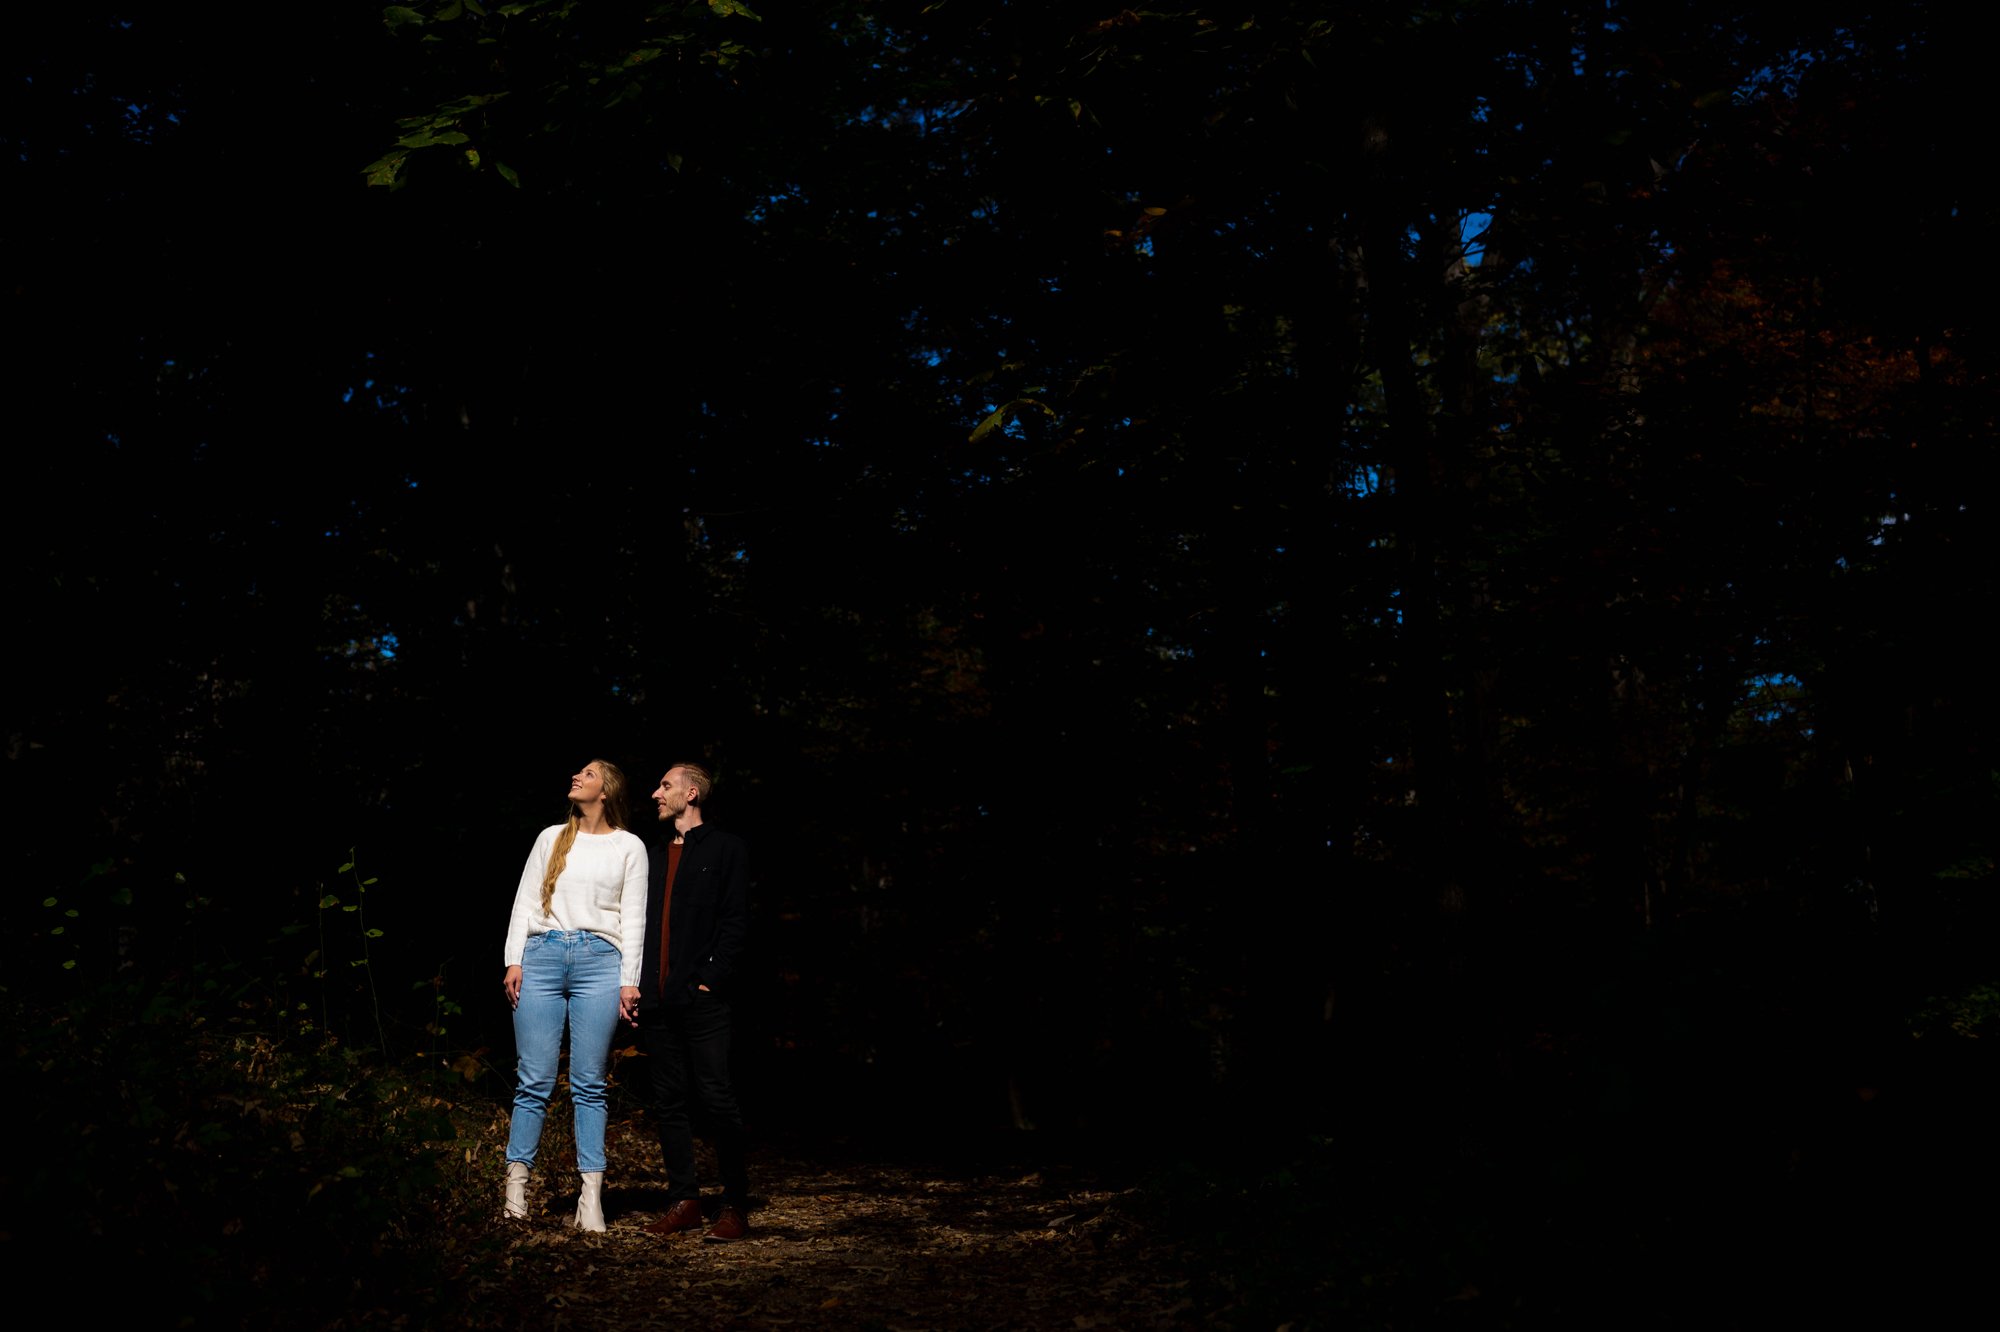  Fun and Exciting Engagement session in Rock Creek Park Washington D.C. Photographer Mantas Kubilinskas The best wedding photographer in DMV Area 